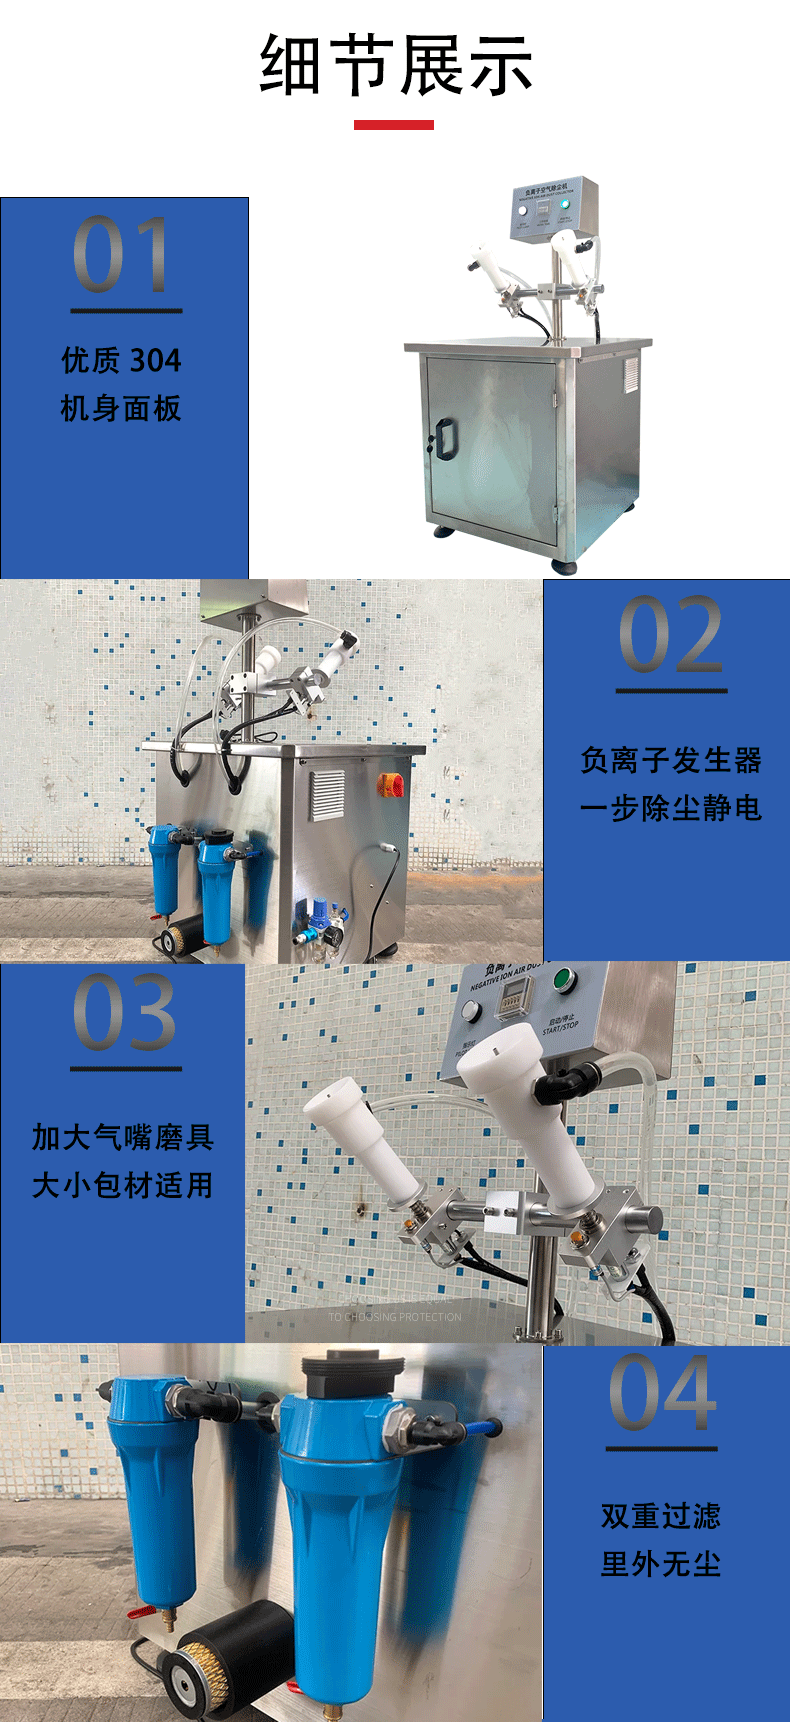 Cosmetic packaging material negative ion electrostatic precipitator glass bottle washing machine dust and impurities cleaning bottle blowing machine